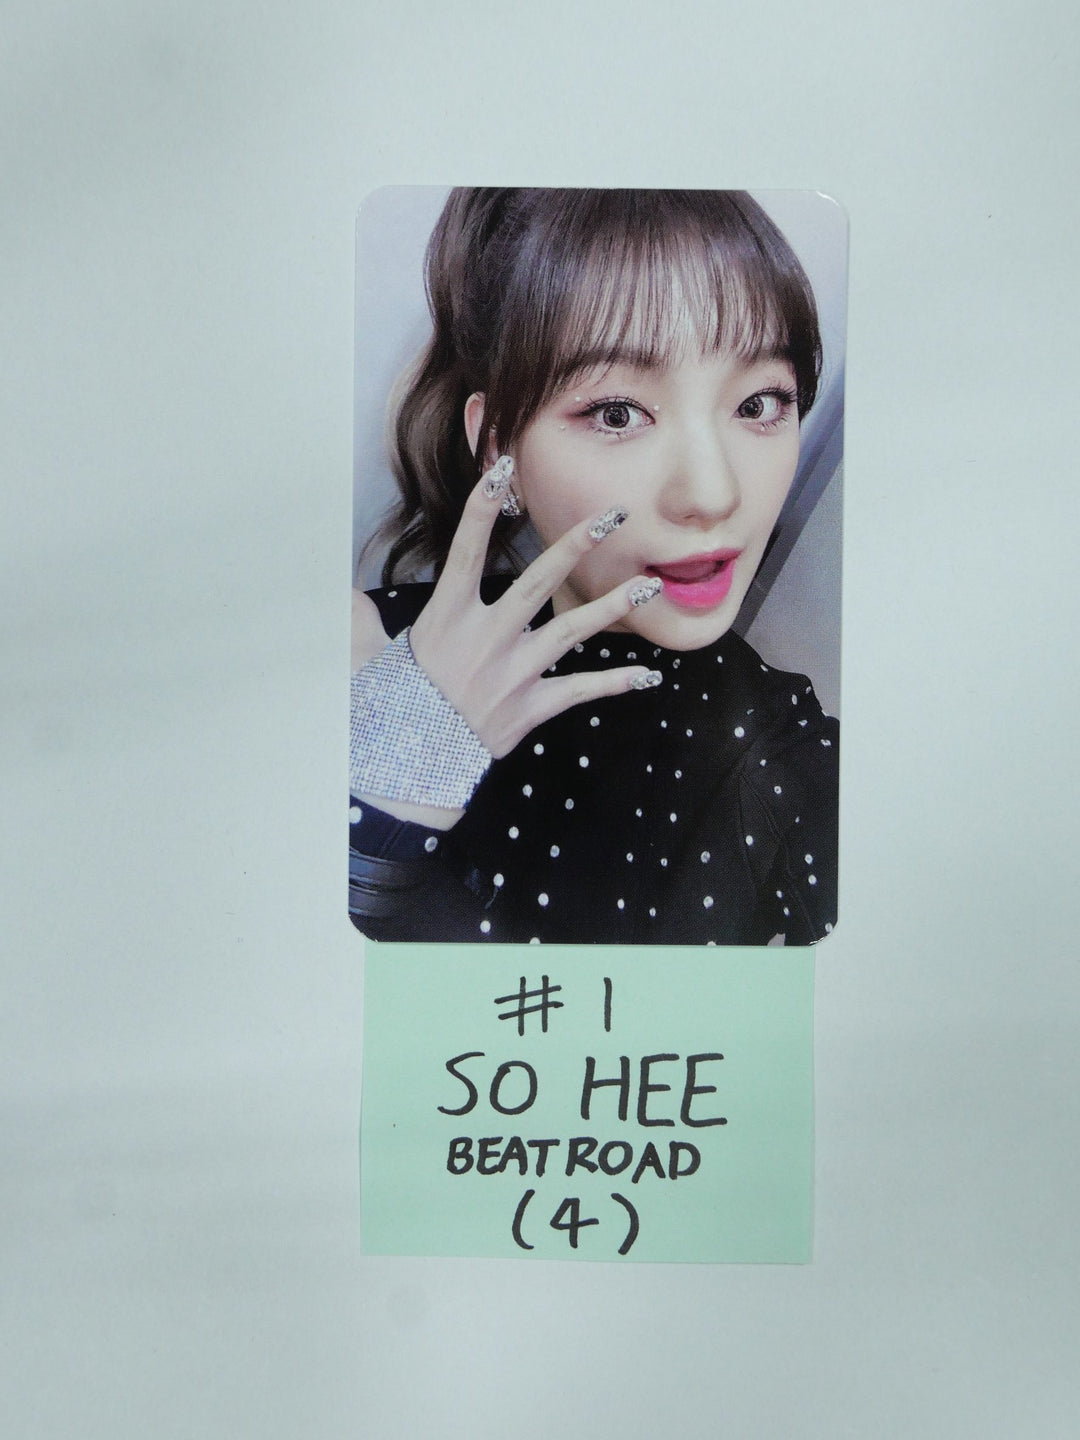 Rocket Punch 'Yellow Punch' - Beatroad Fansign Event Photocard